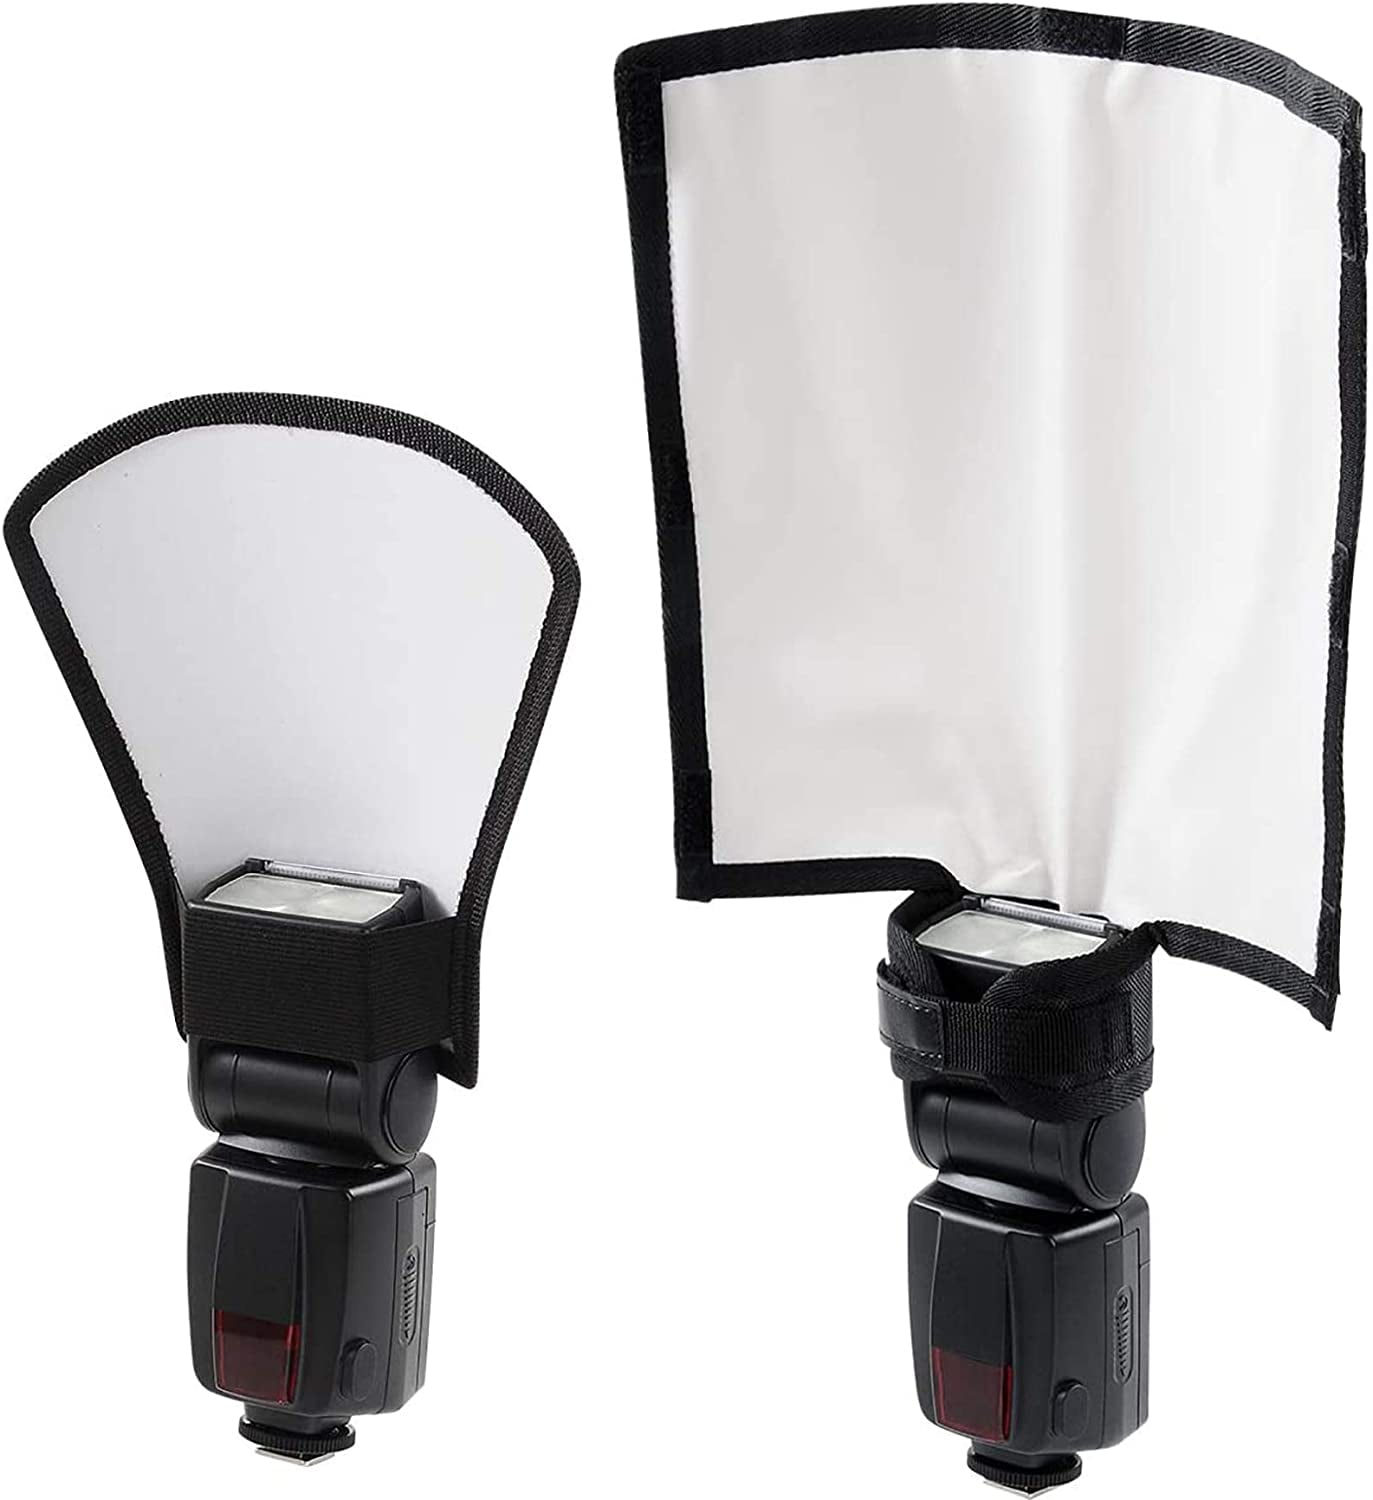 Flash Diffuser Reflector Kit - Bend Bounce Flash Diffuser+ Silver/White  Reflector for Speedlight, Universal Mount 